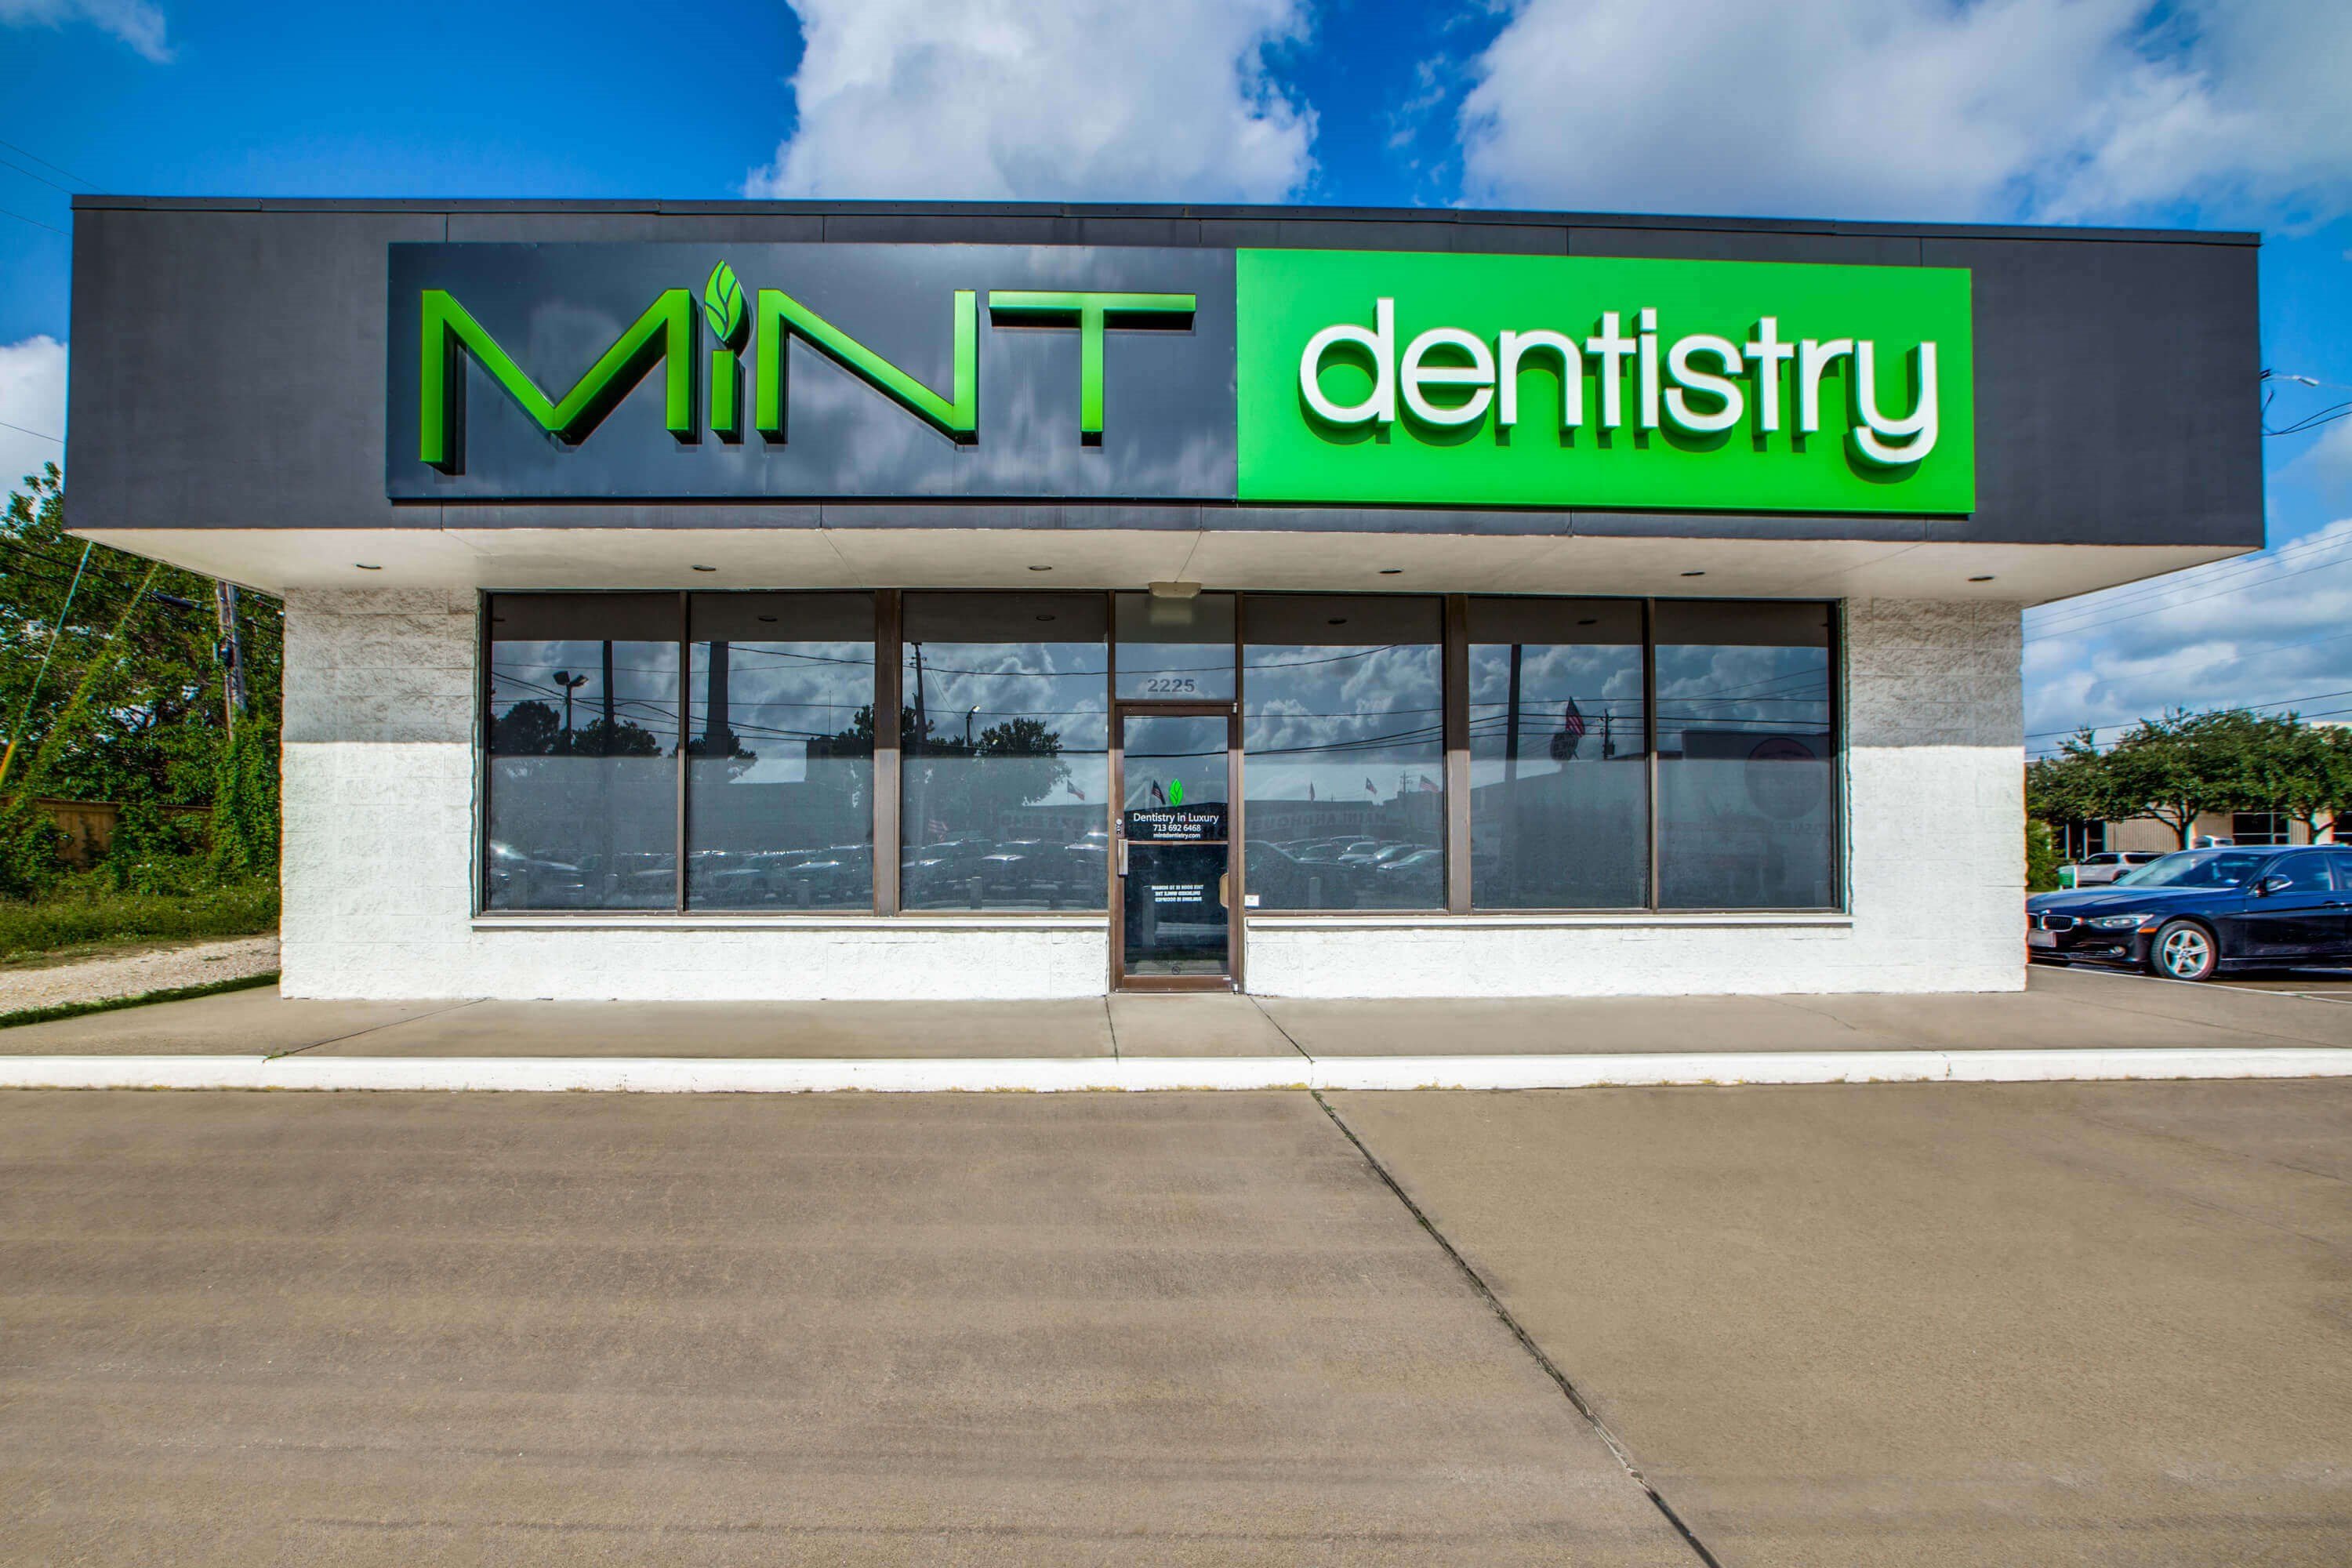 Does Mint Dentistry Take Medicaid?